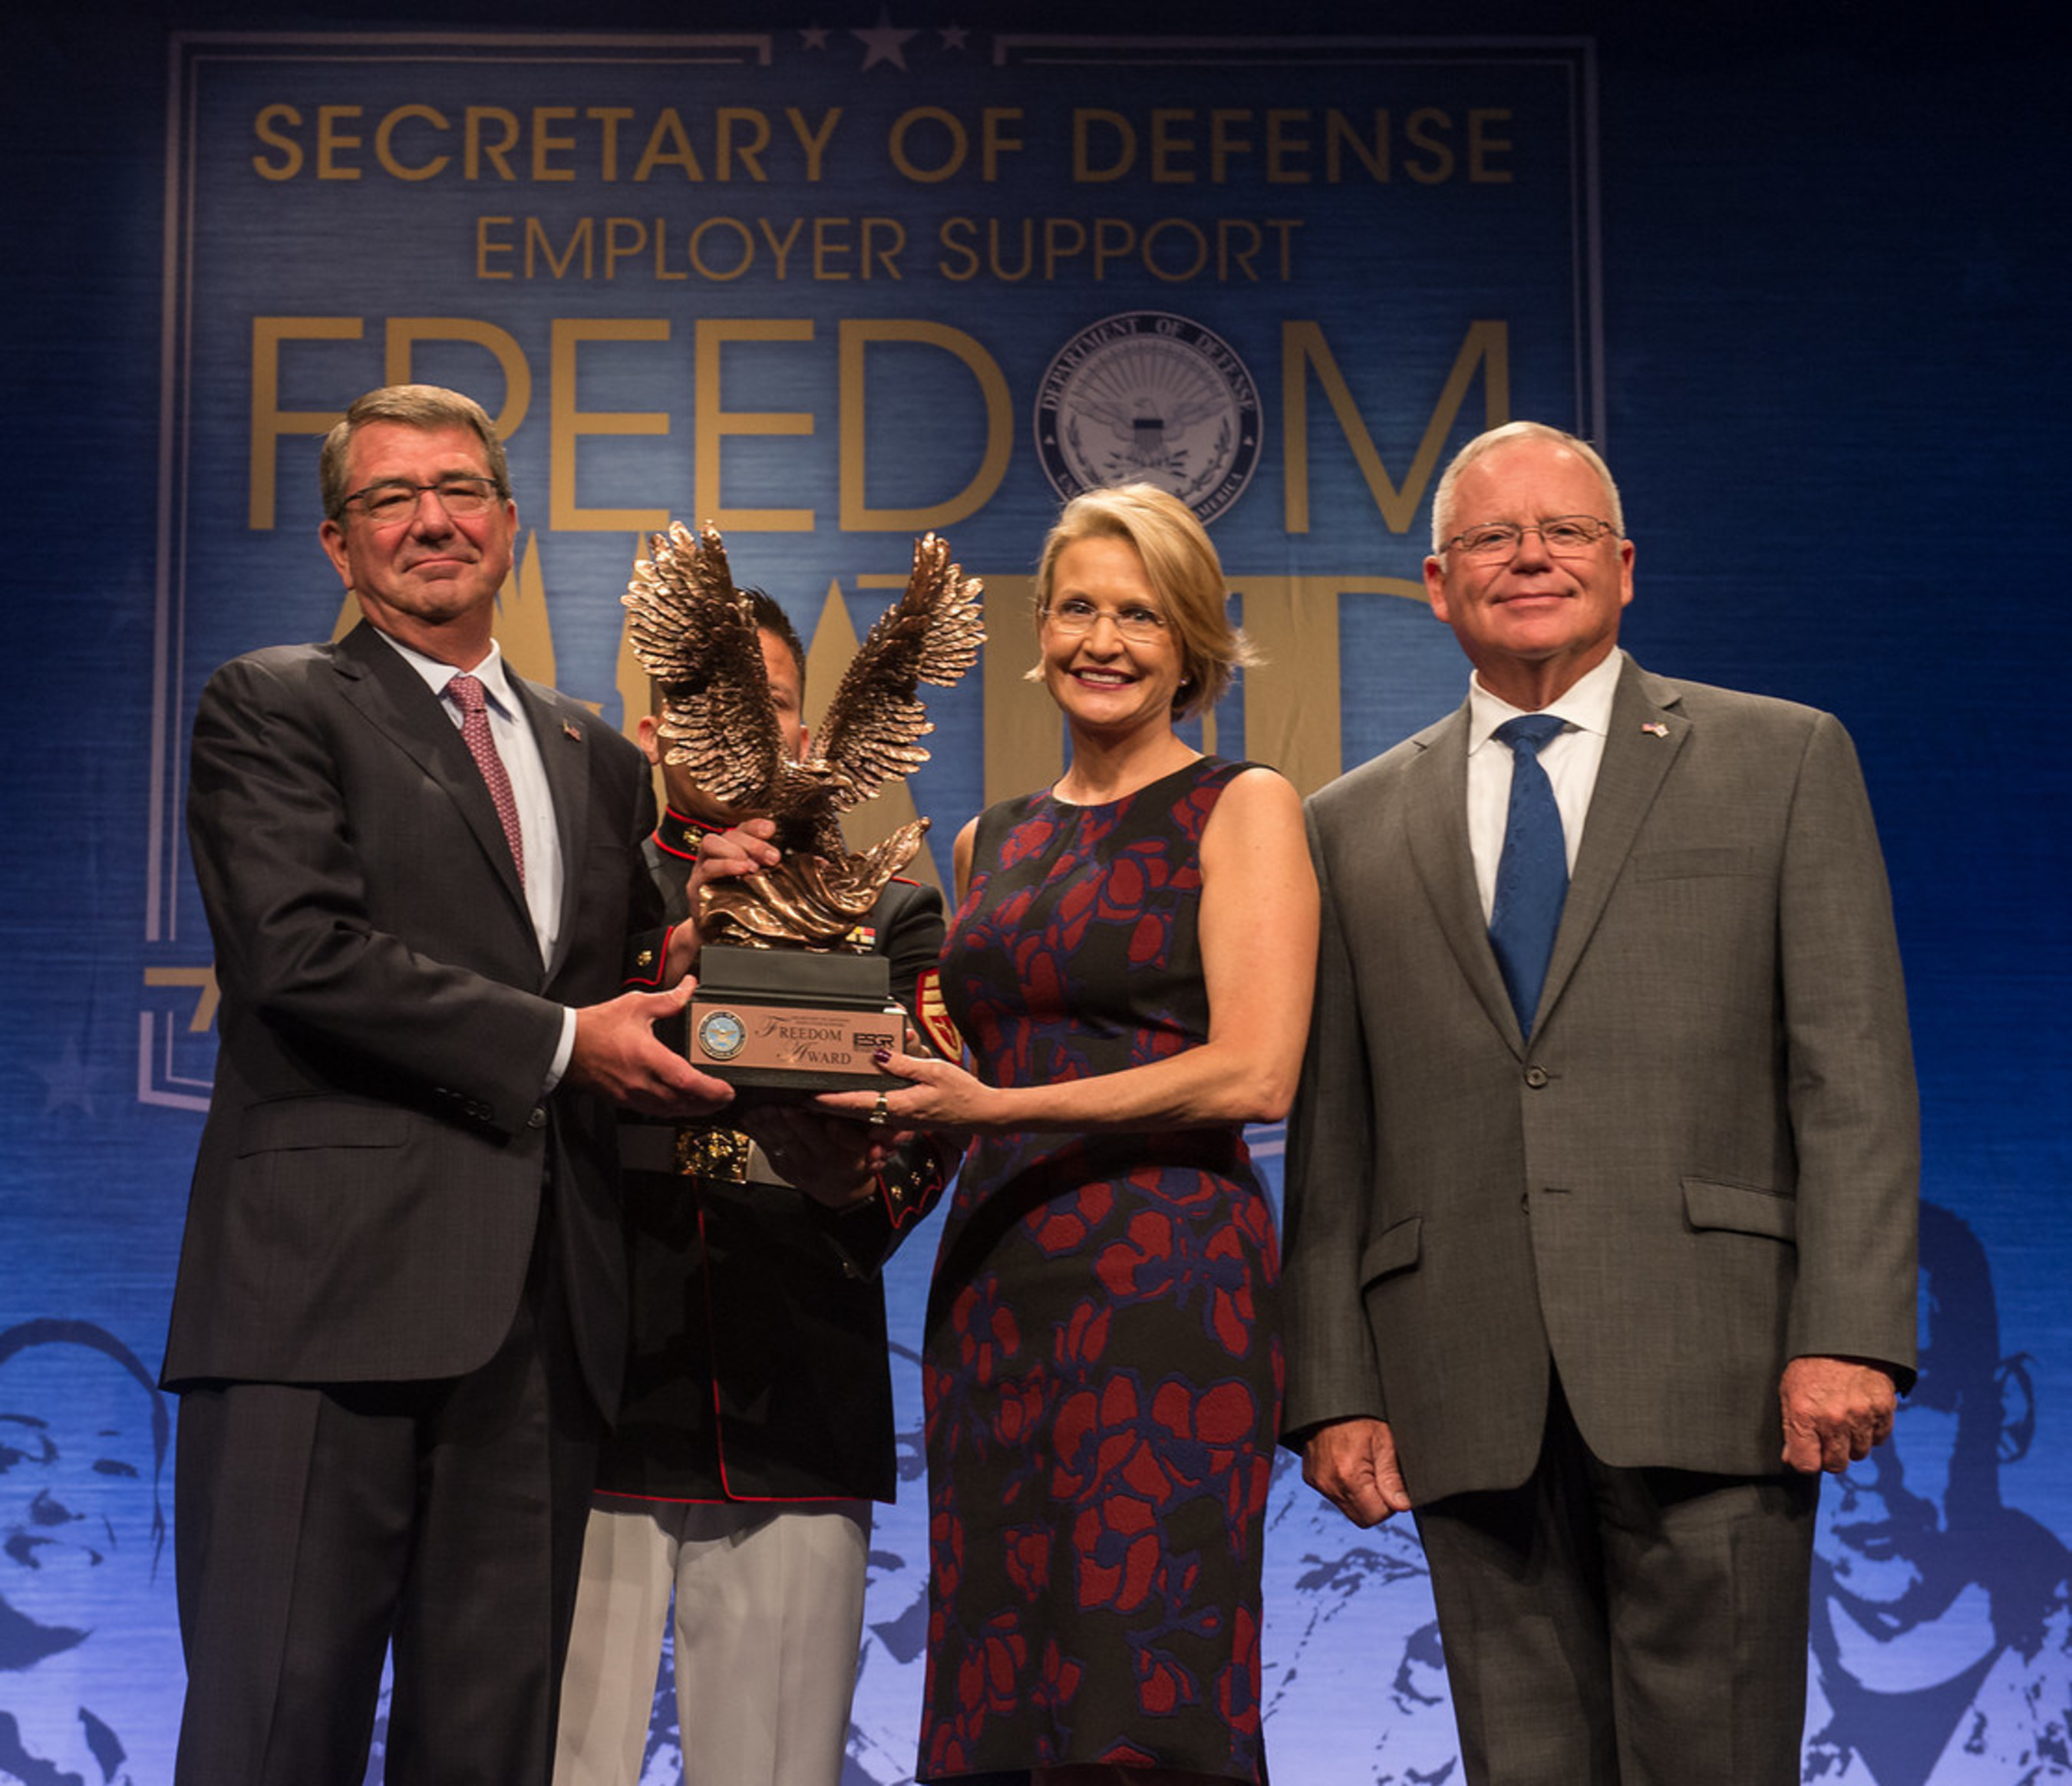 Secretary of Defense, Ashton B. Carter recognizes CEO Catherine Monson of FASTSIGNS International, Inc. at the DoD Freedom Awards, August 26, 2016 in the Pentagon Auditorium. (U.S. Army photo by Sgt. Ricky Bowden)